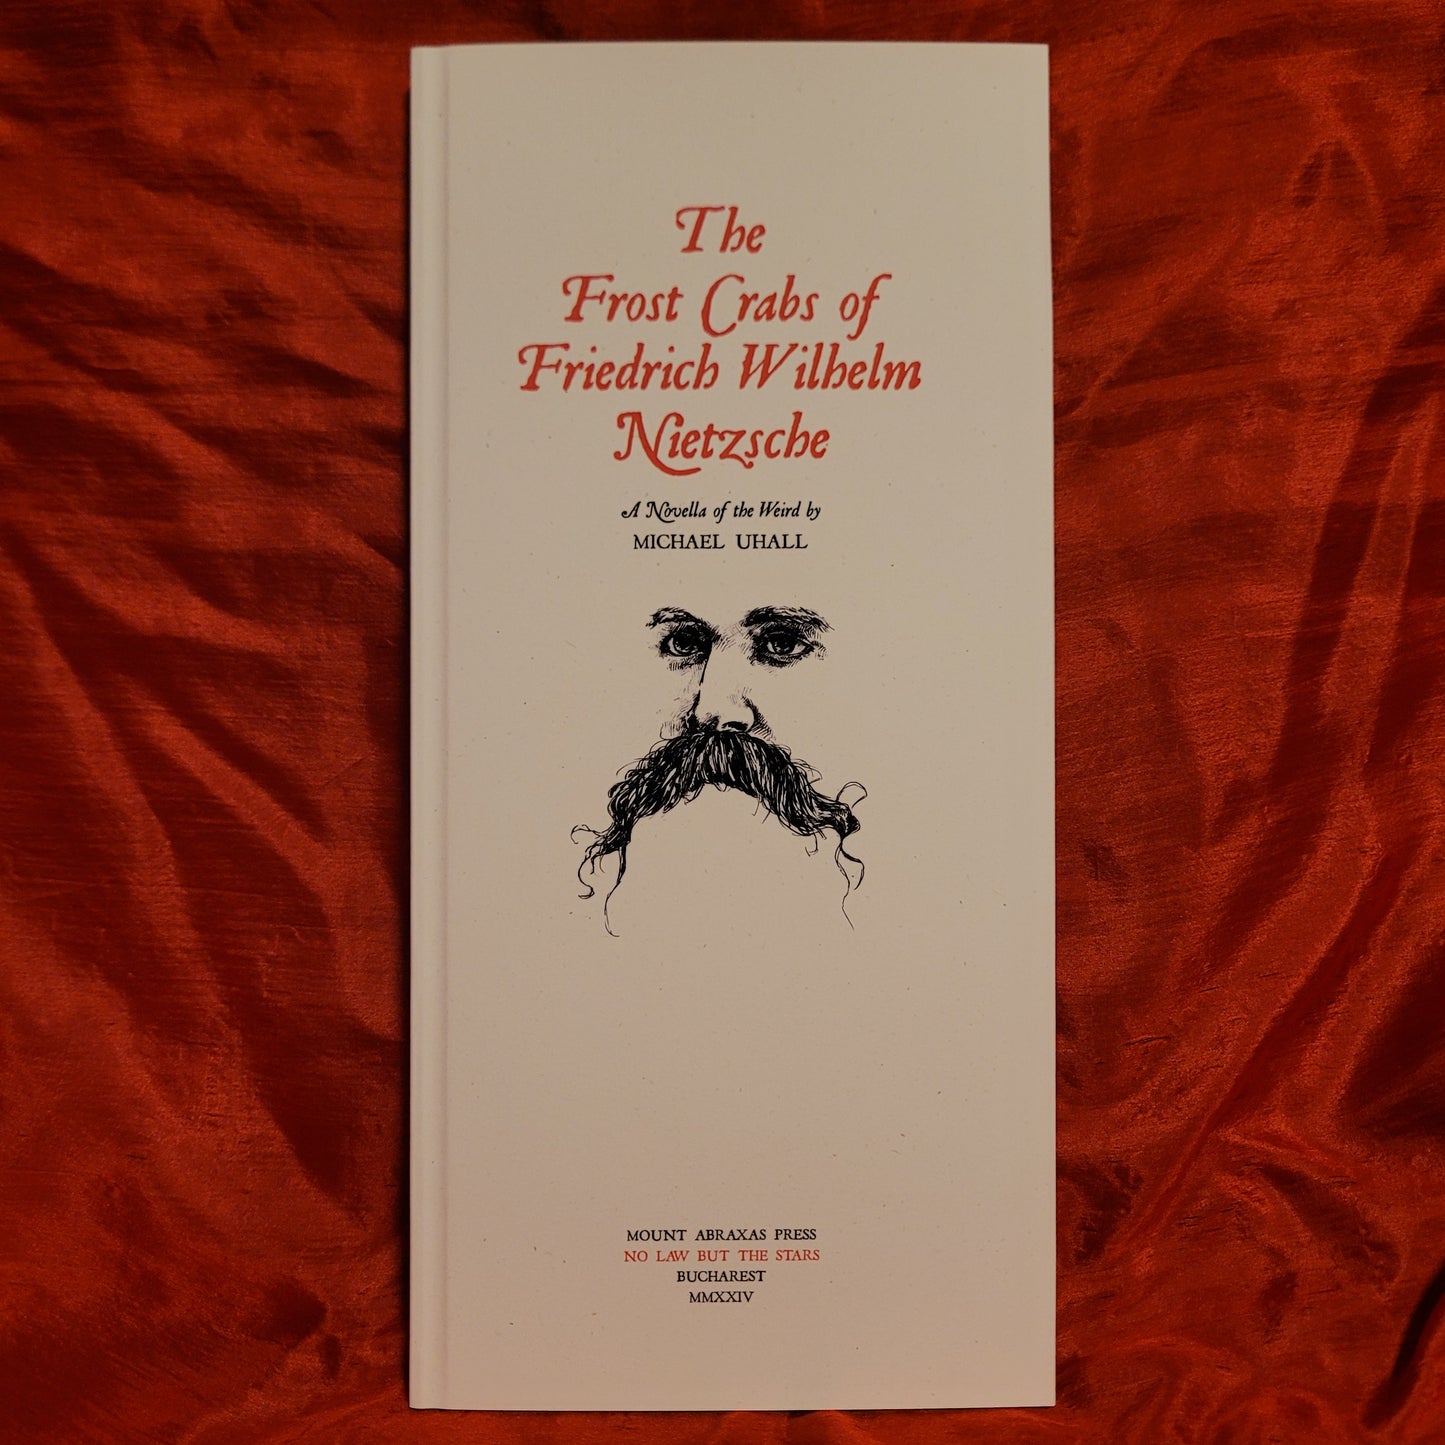 The Frost Crabs of Friedrich Wilhelm Nietzsche: A Novella of the Weird by Michael Uhall (Mount Abraxas Press, 2024) Hardcover Limited to 93 Copies